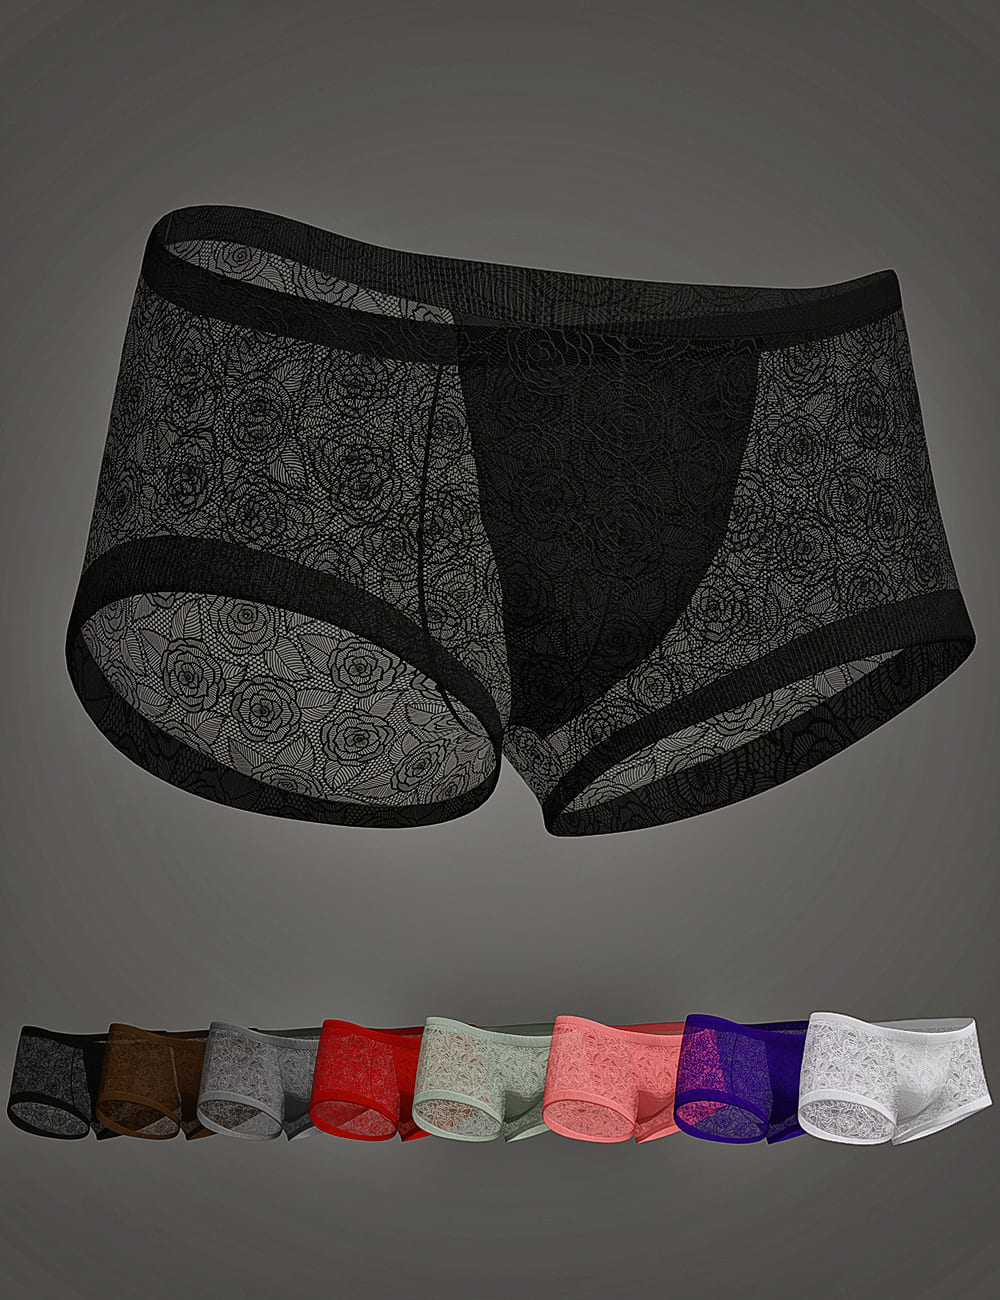 XF Bunny Lace Lingerie Briefs for Genesis 8 and 8.1 Males_DAZ3D下载站